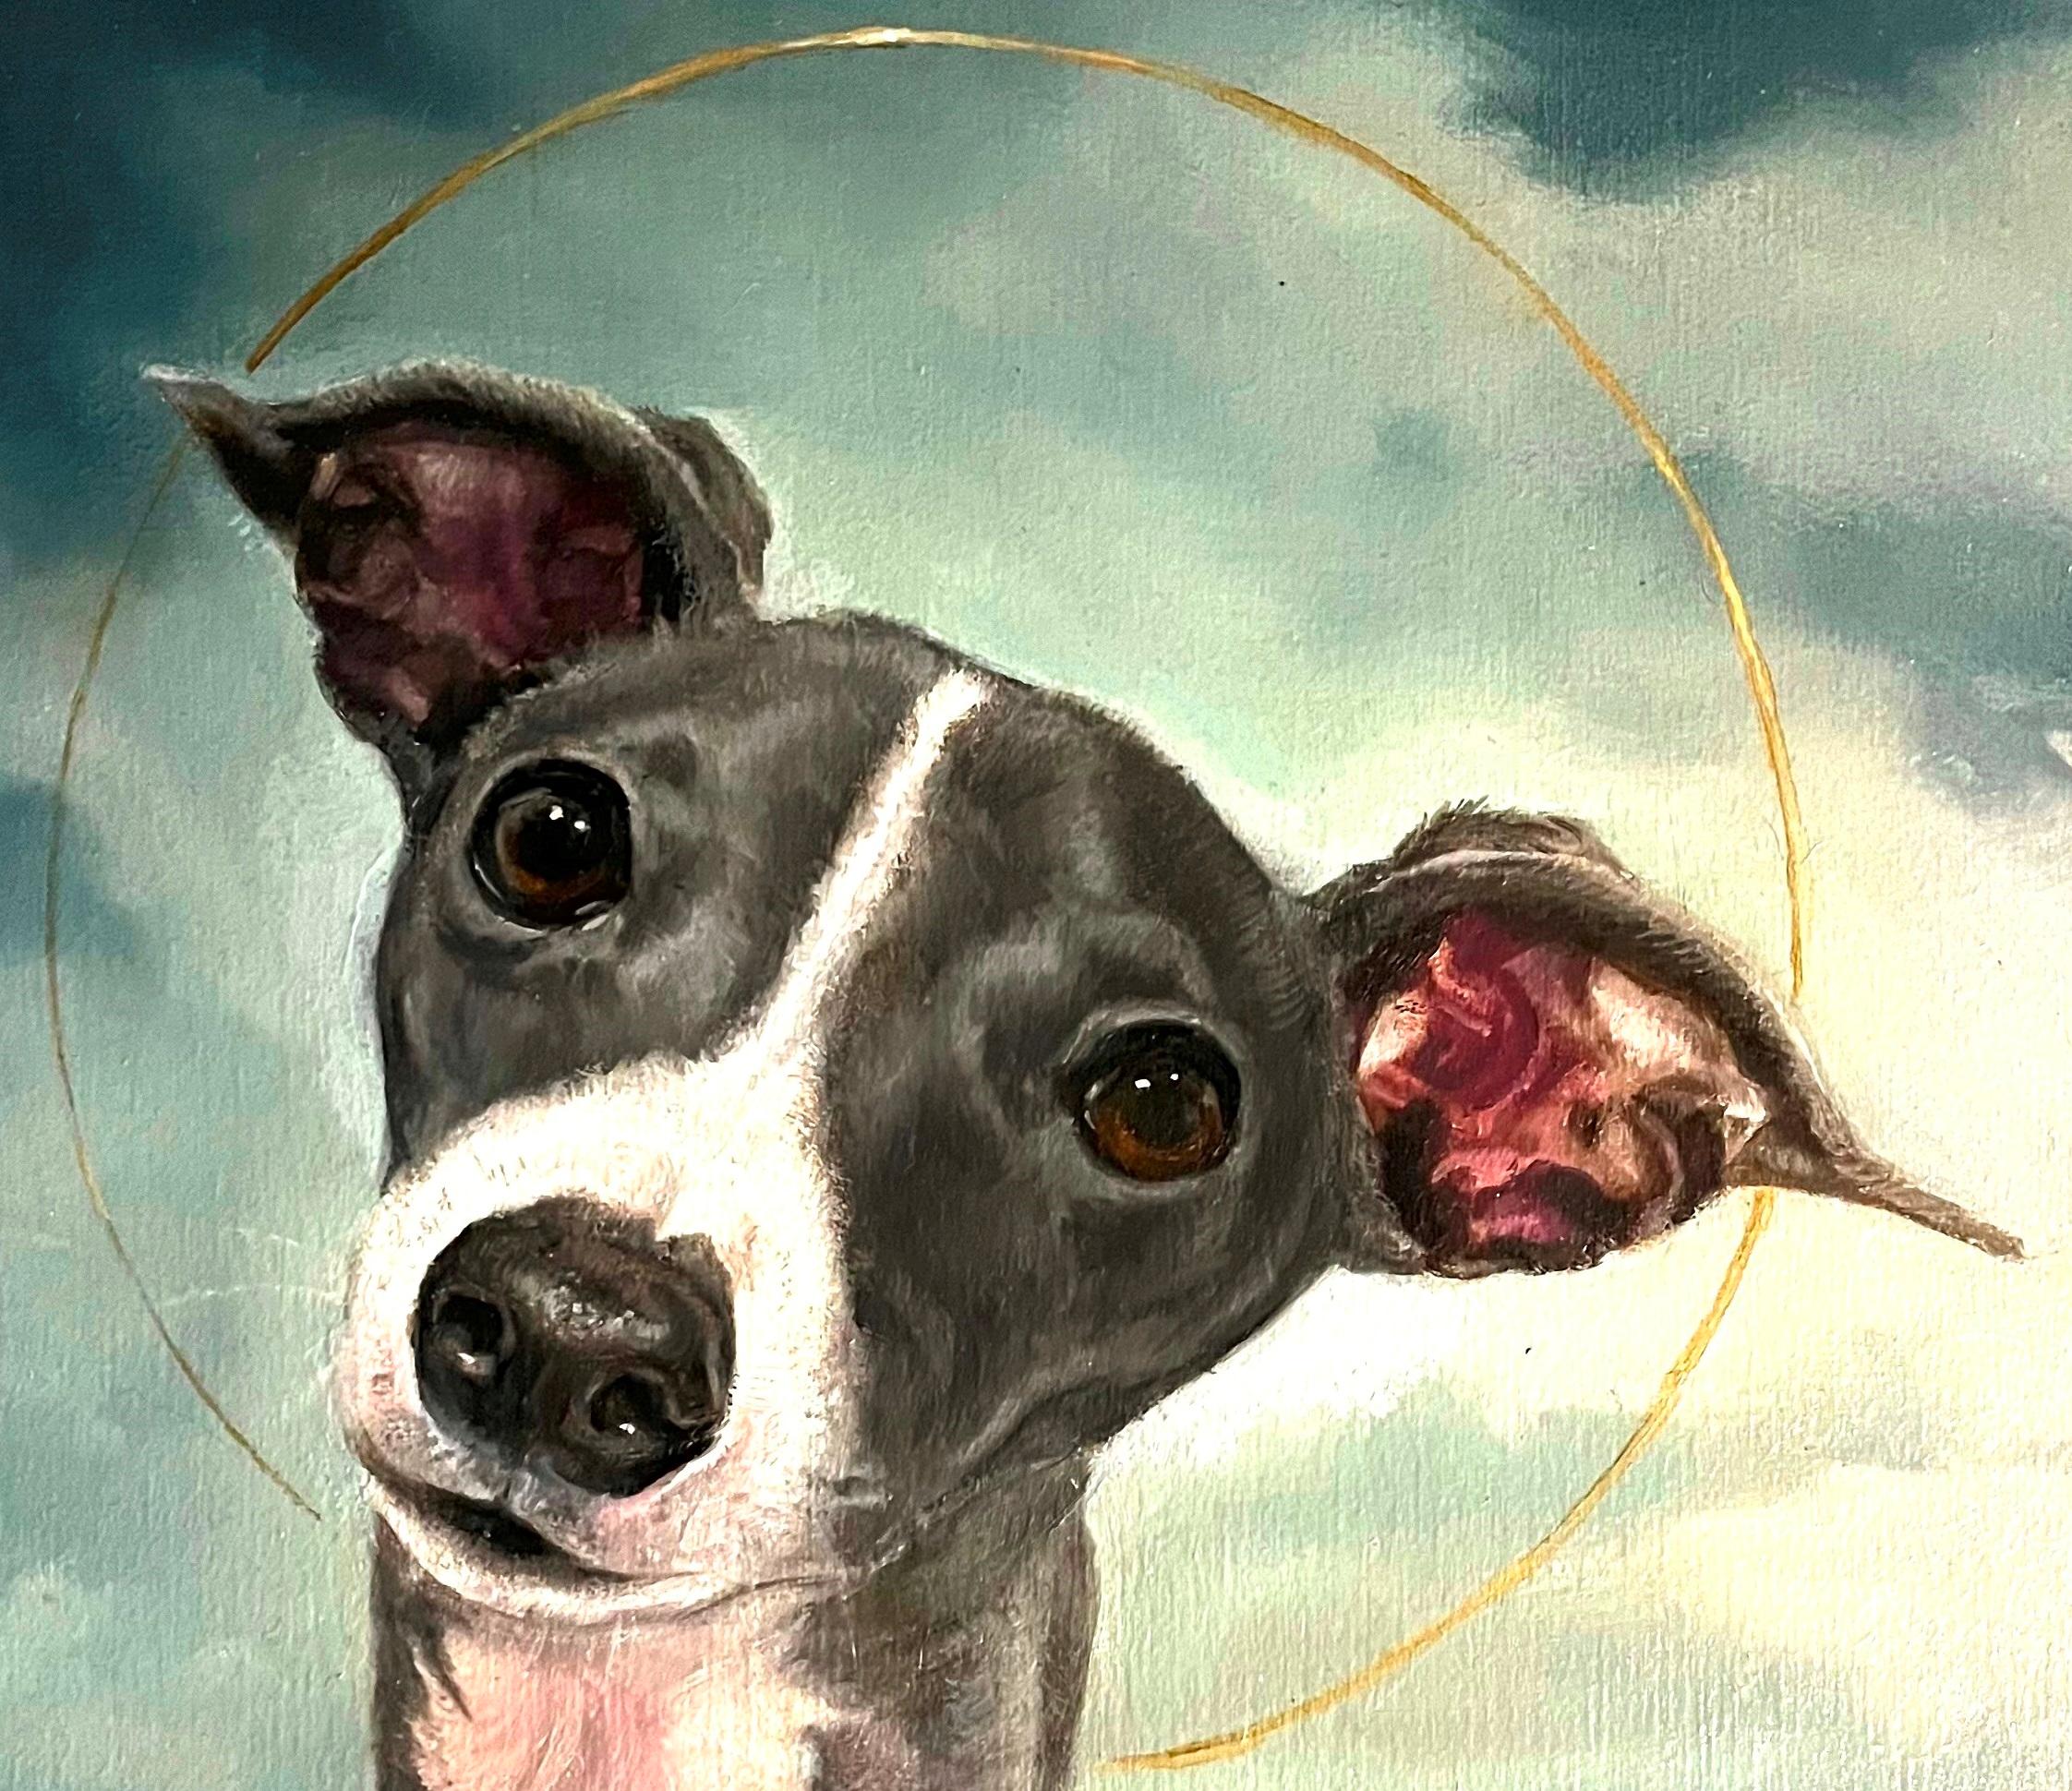 A Sacred Haloed Greyhound Reminding Us that All Dogs are Angels - Painting by Valarie Wolf